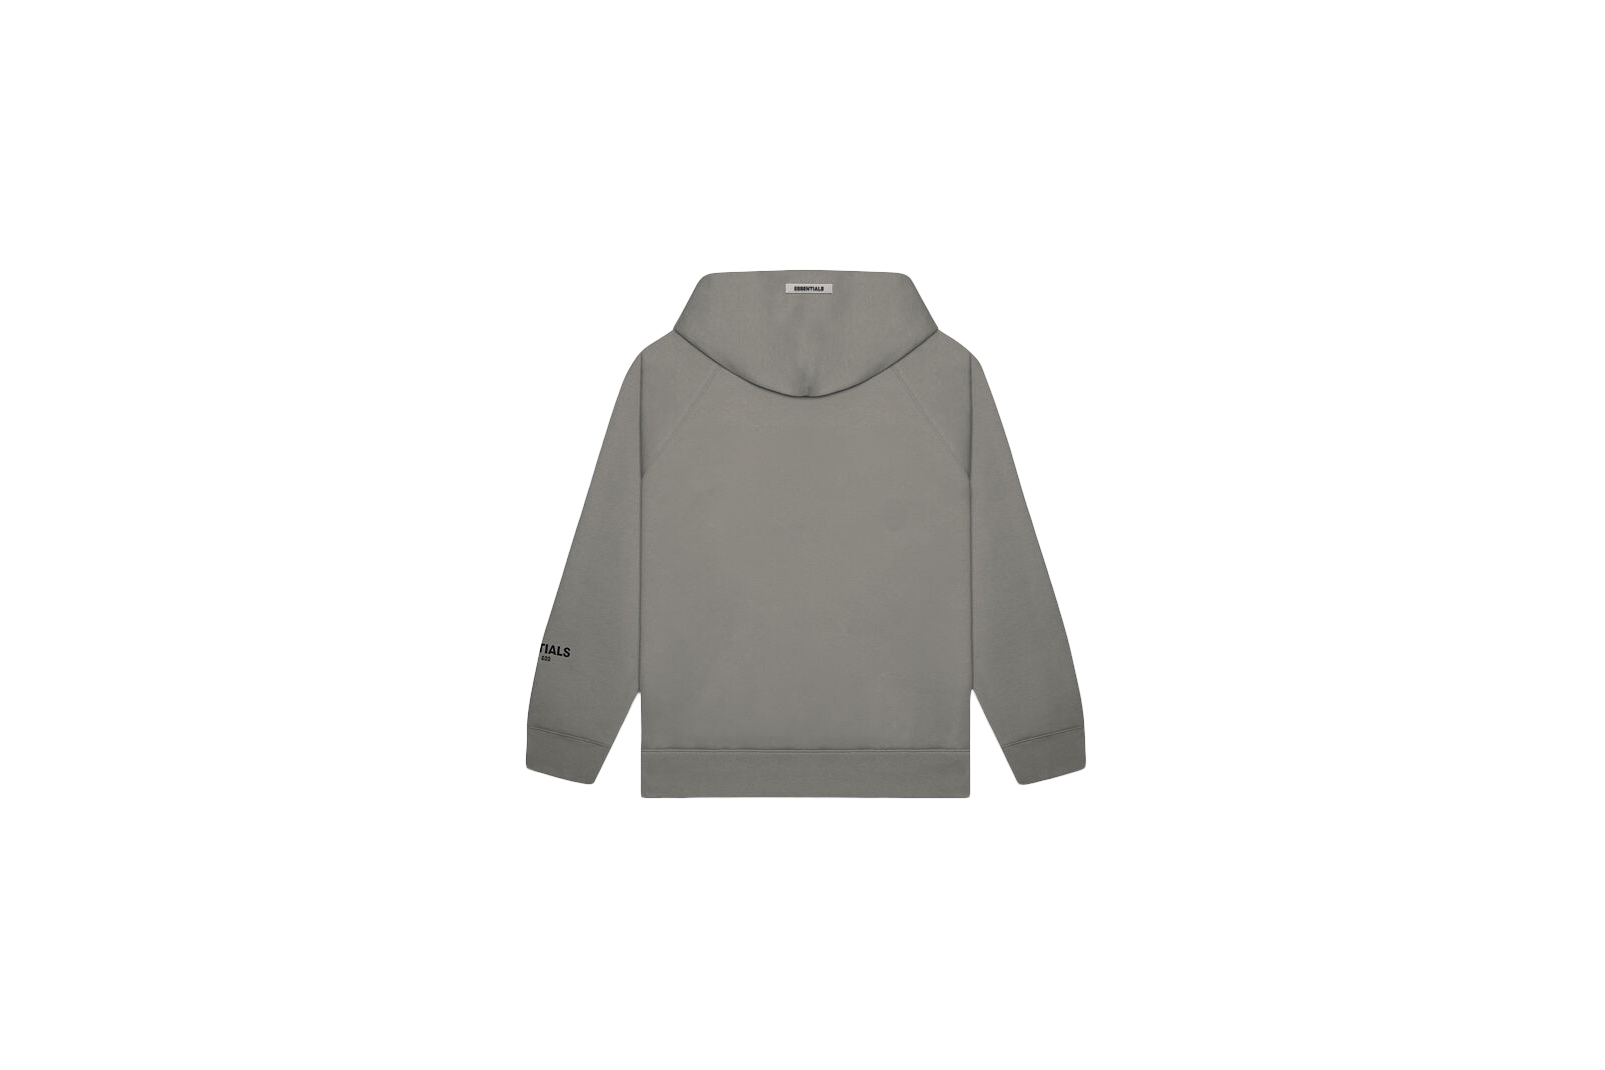 Fear of God Essentials 3D Silicon Applique Pullover Hoodie Gray  Flannel/Charcoal - SS20 - US